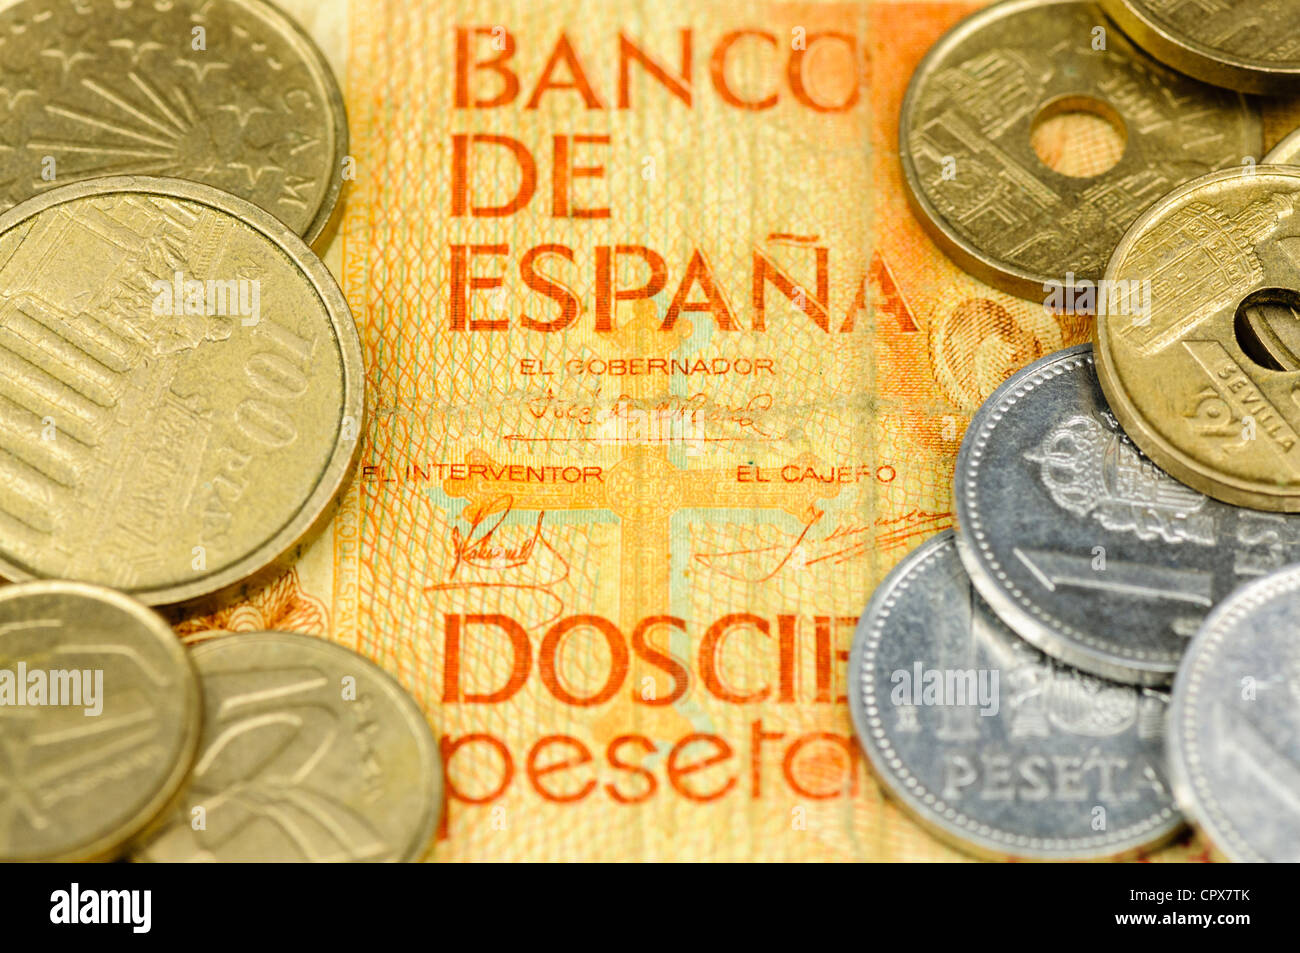 Spanish Peseta bank note and coins Stock Photo